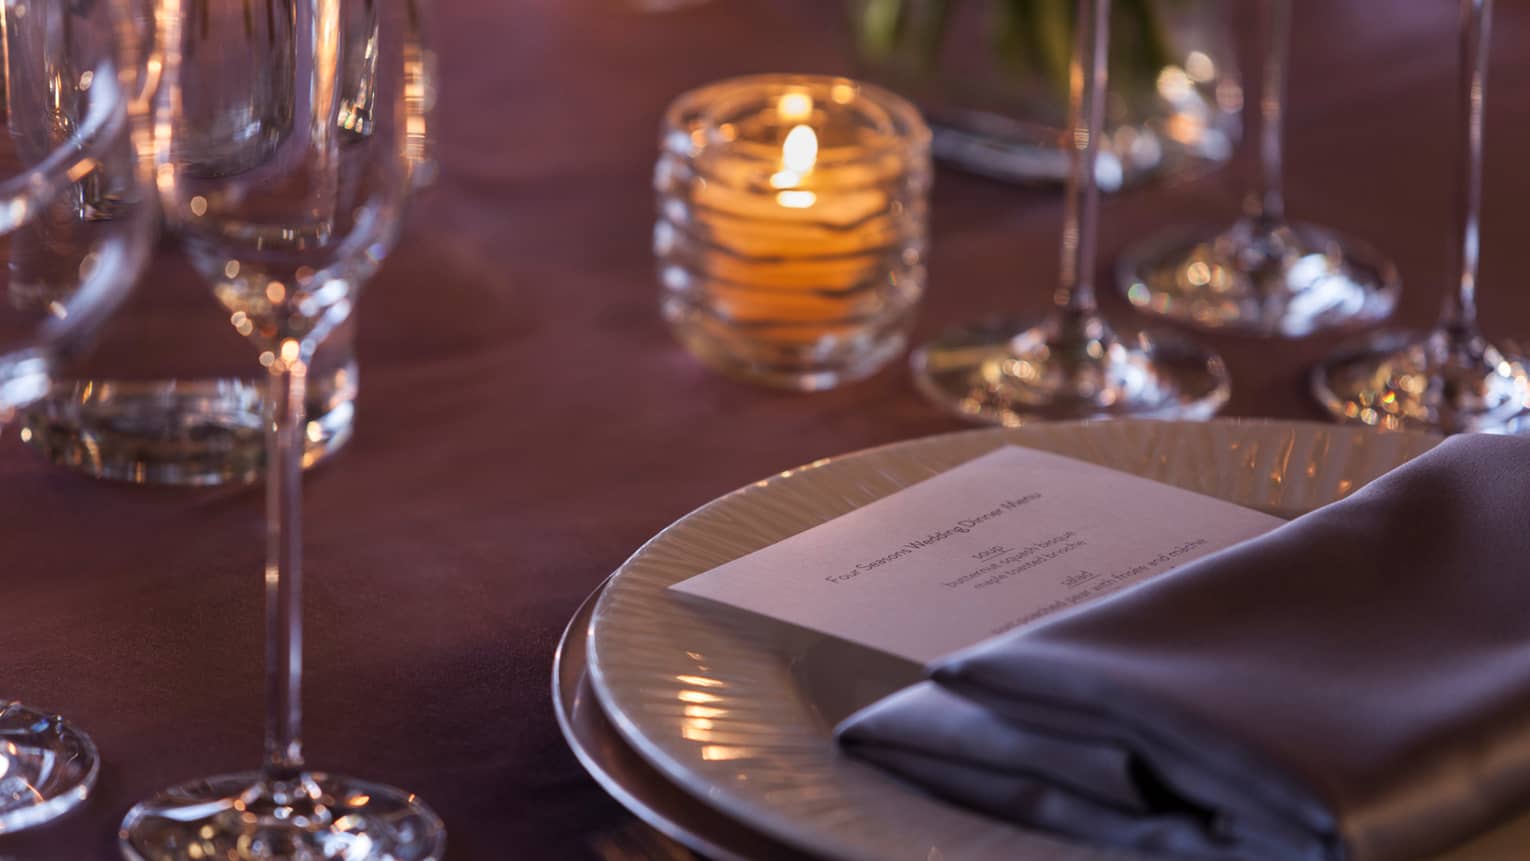 Close up of table with candle, grey napkin and dinner menu on white plate, glasses 